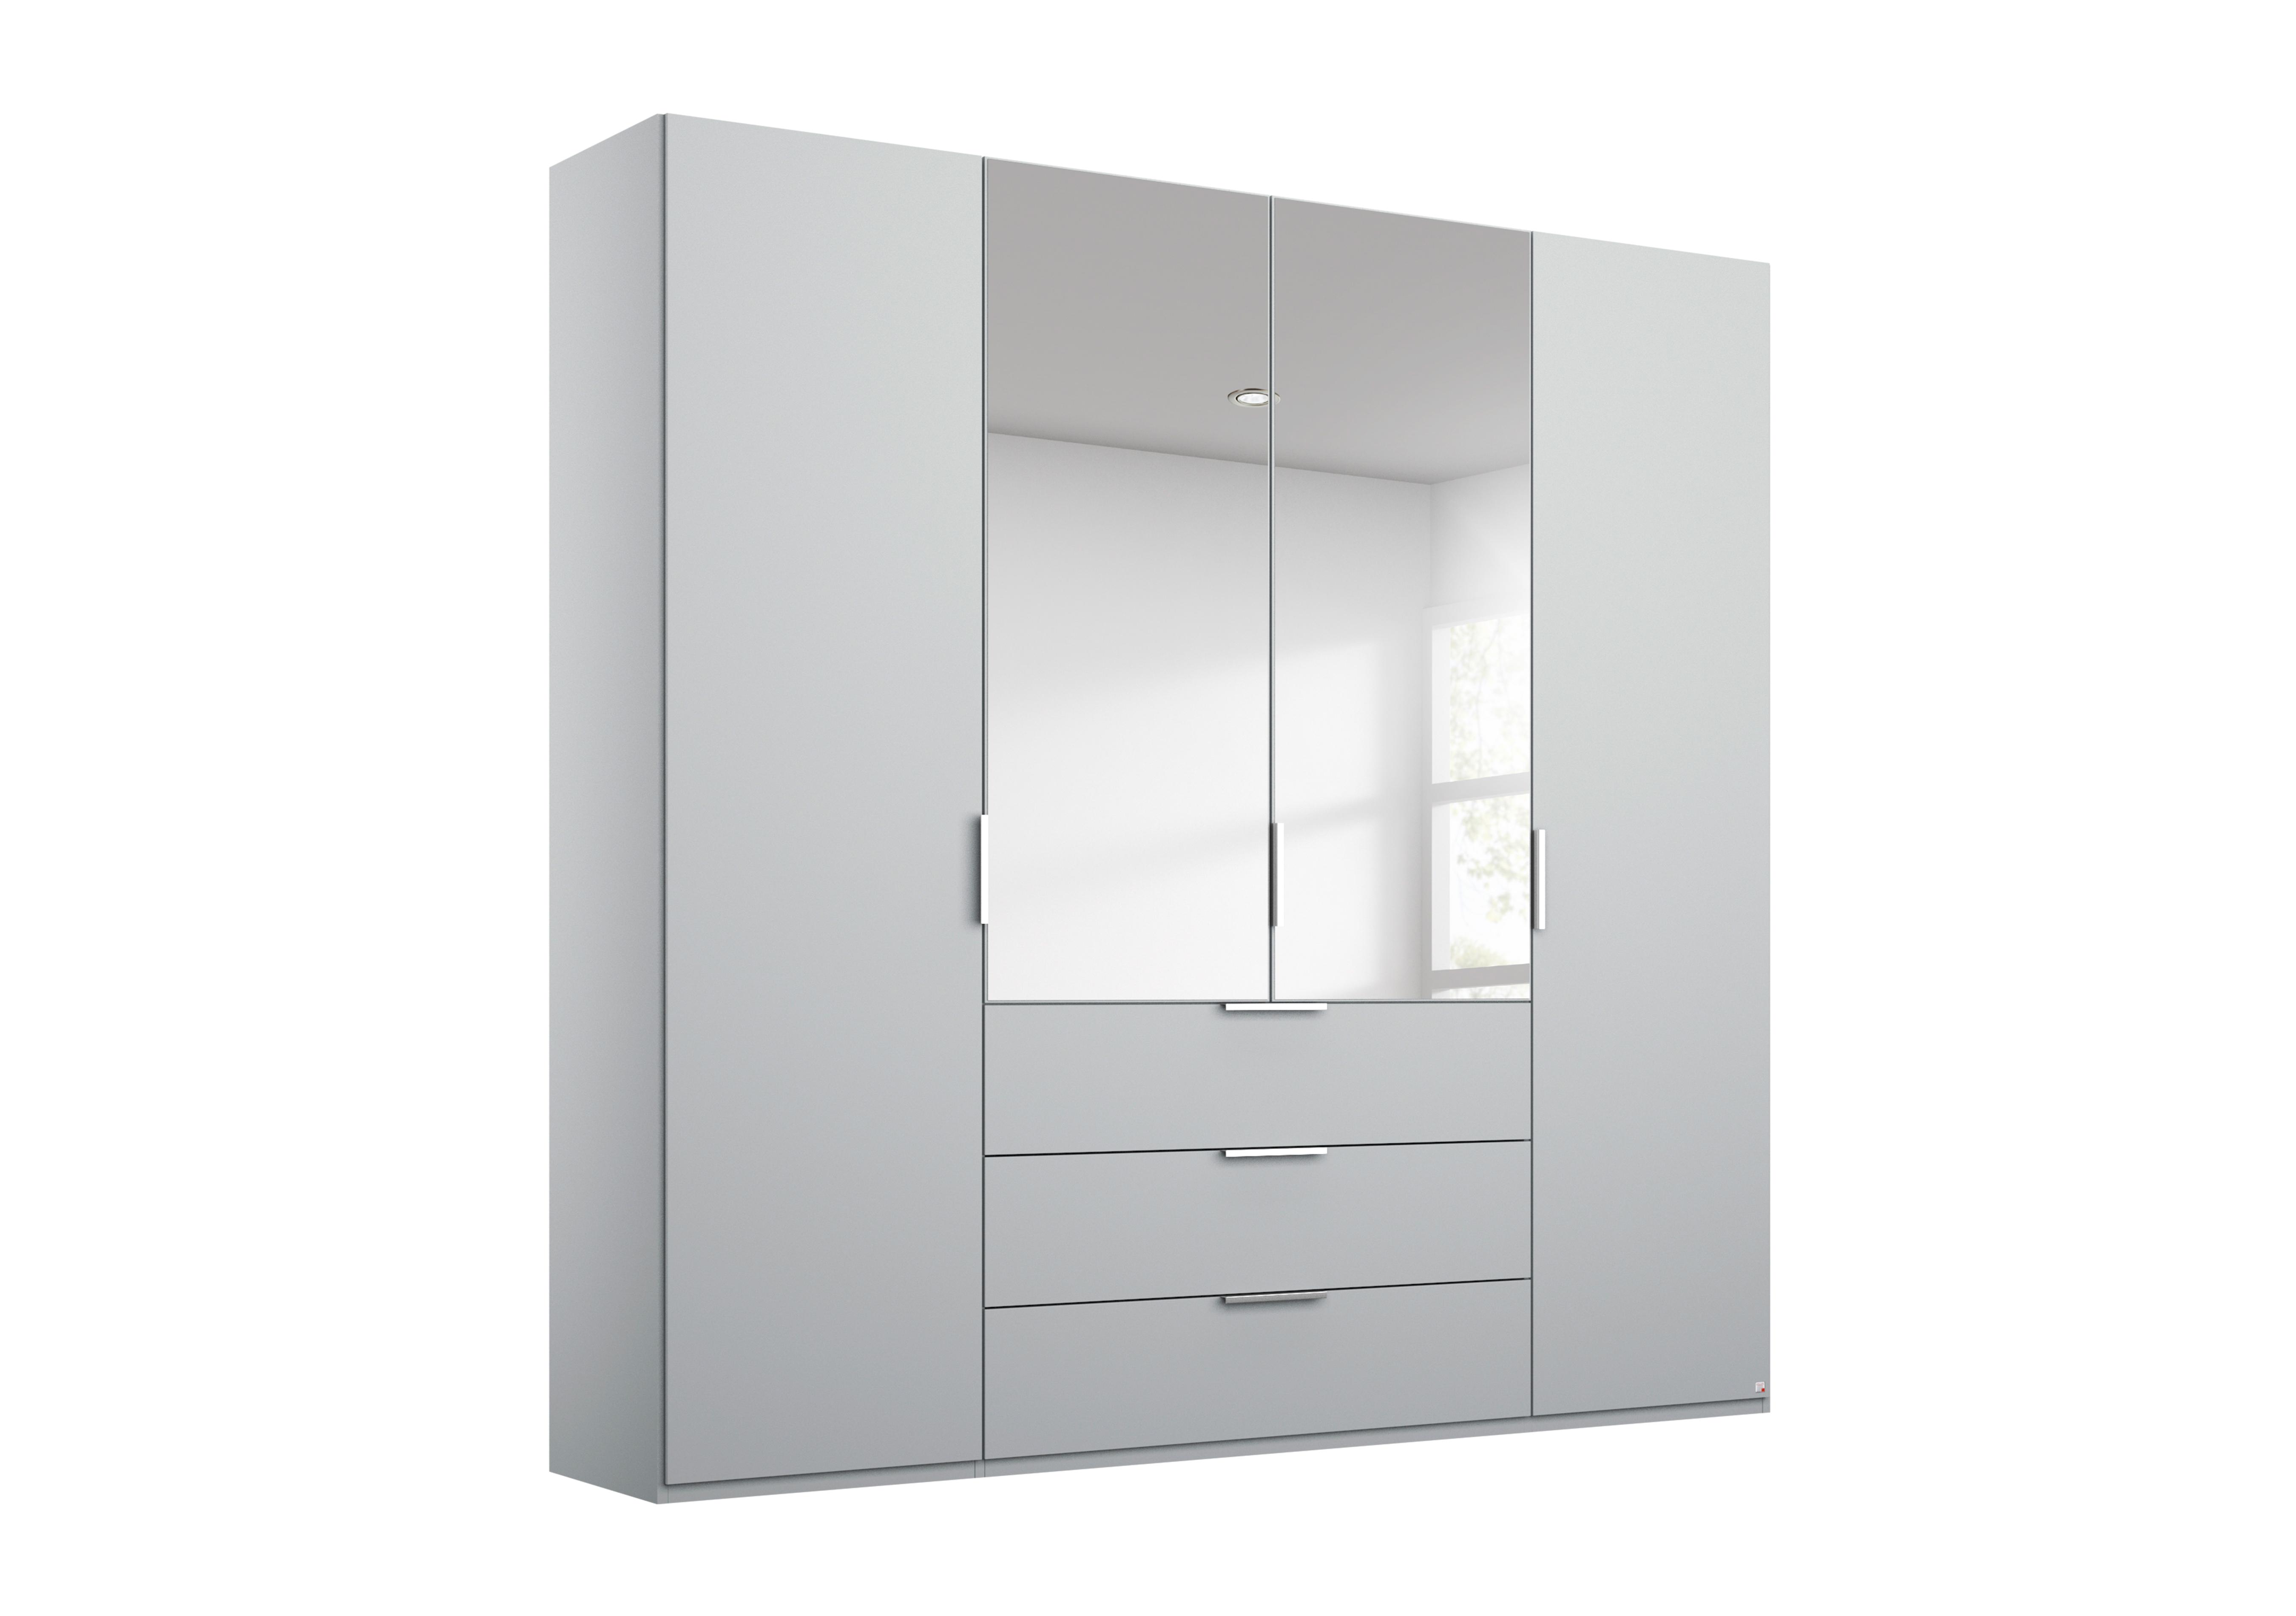 Formes Decor 4 Door Combo Hinged Wardrobe with 2 Mirrors and Drawers in A142b Silk Grey on Furniture Village